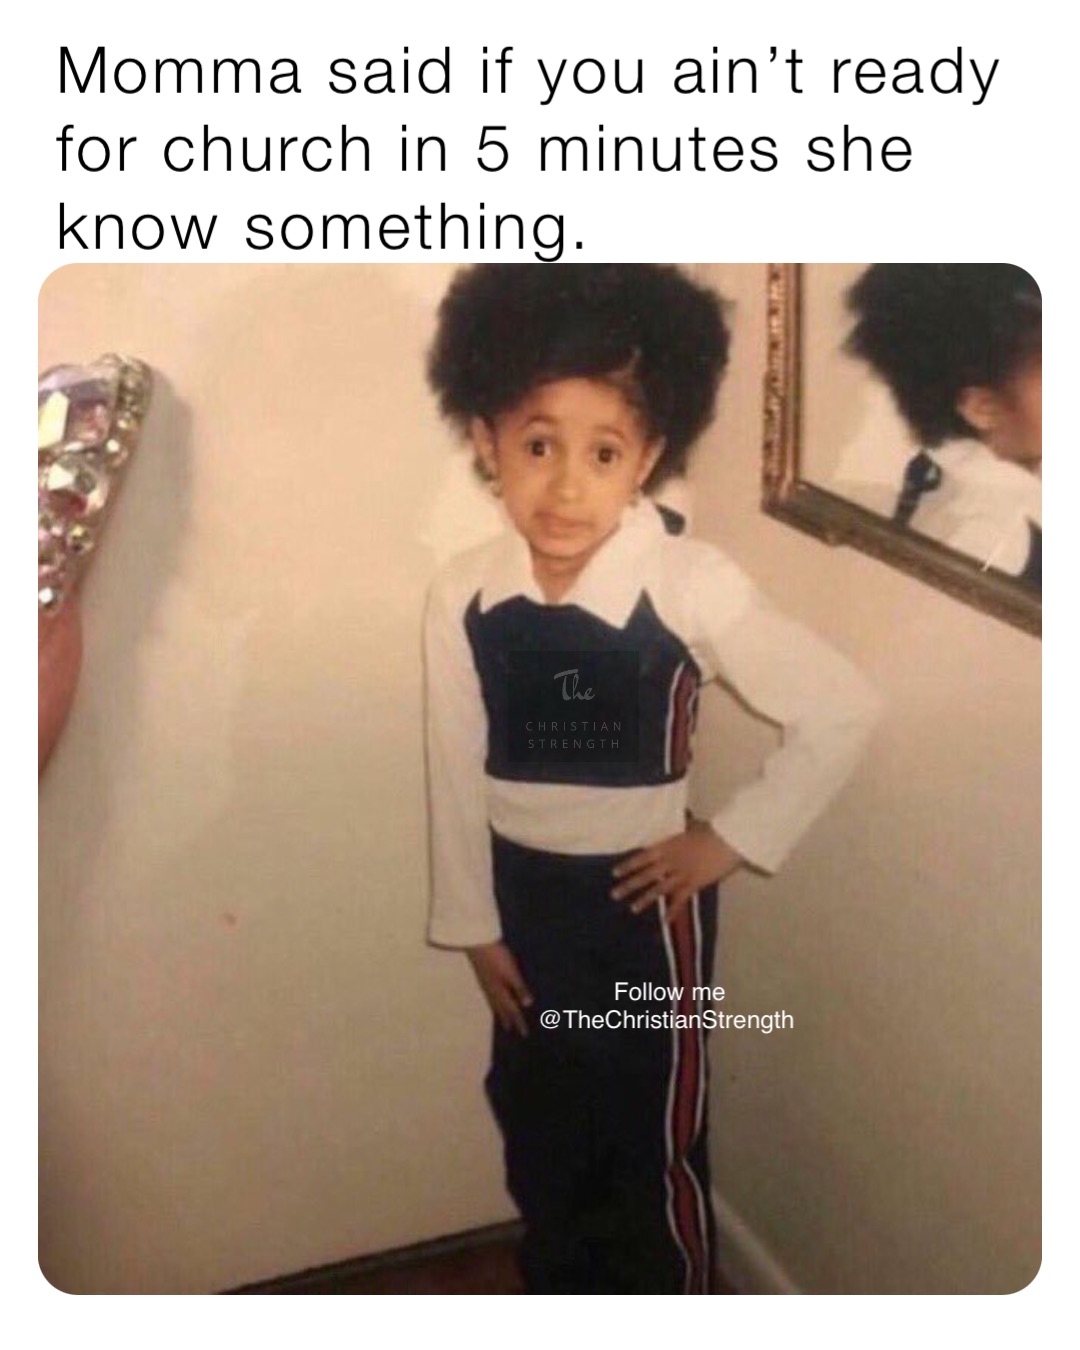 Momma said if you ain’t ready for church in 5 minutes she know something. Follow me @TheChristianStrength